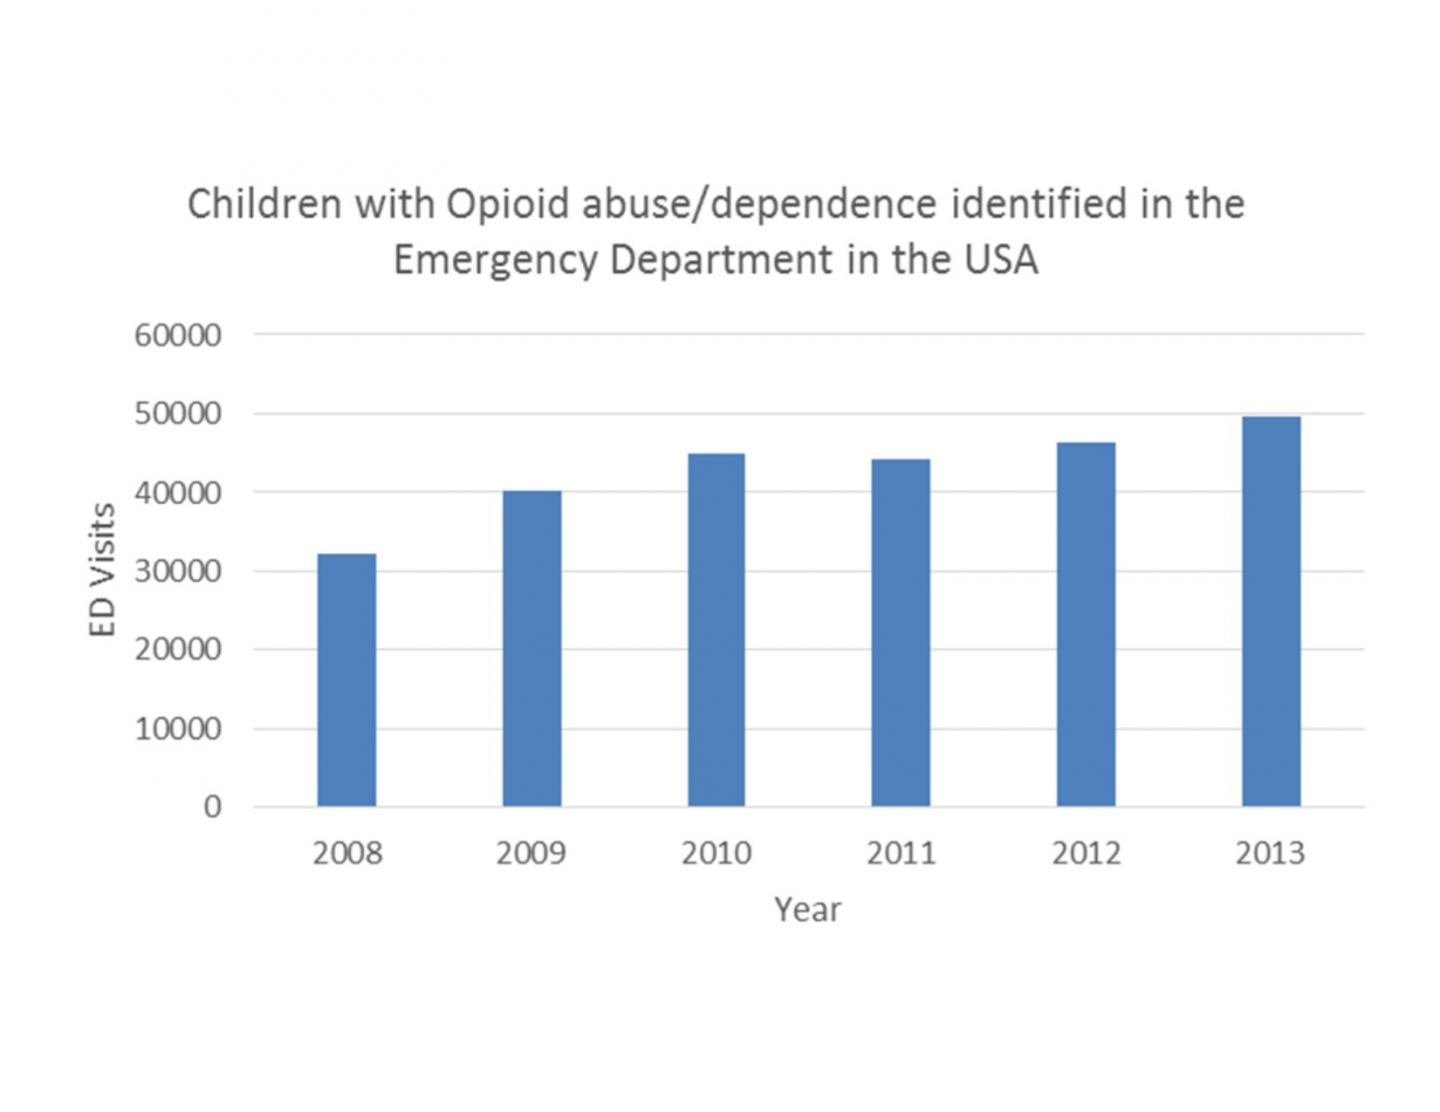 Children with Opioid Abuse/Dependence